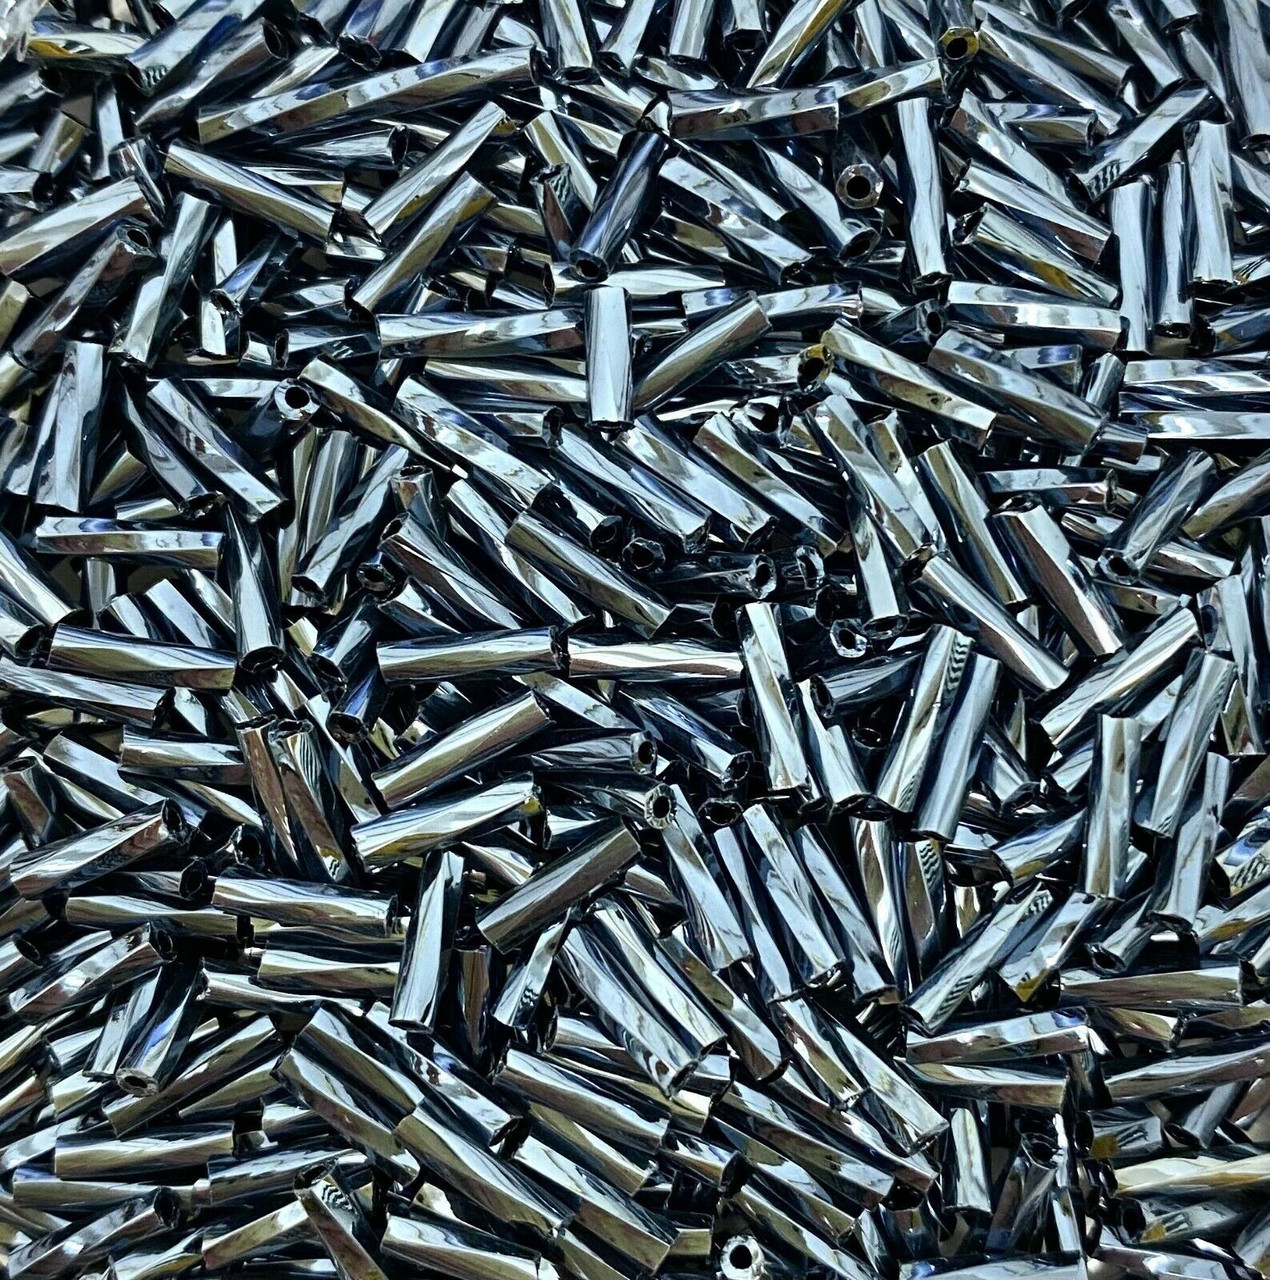 50g glass Twisted bugle beads - Blue-Black Opaque - approx 6mm